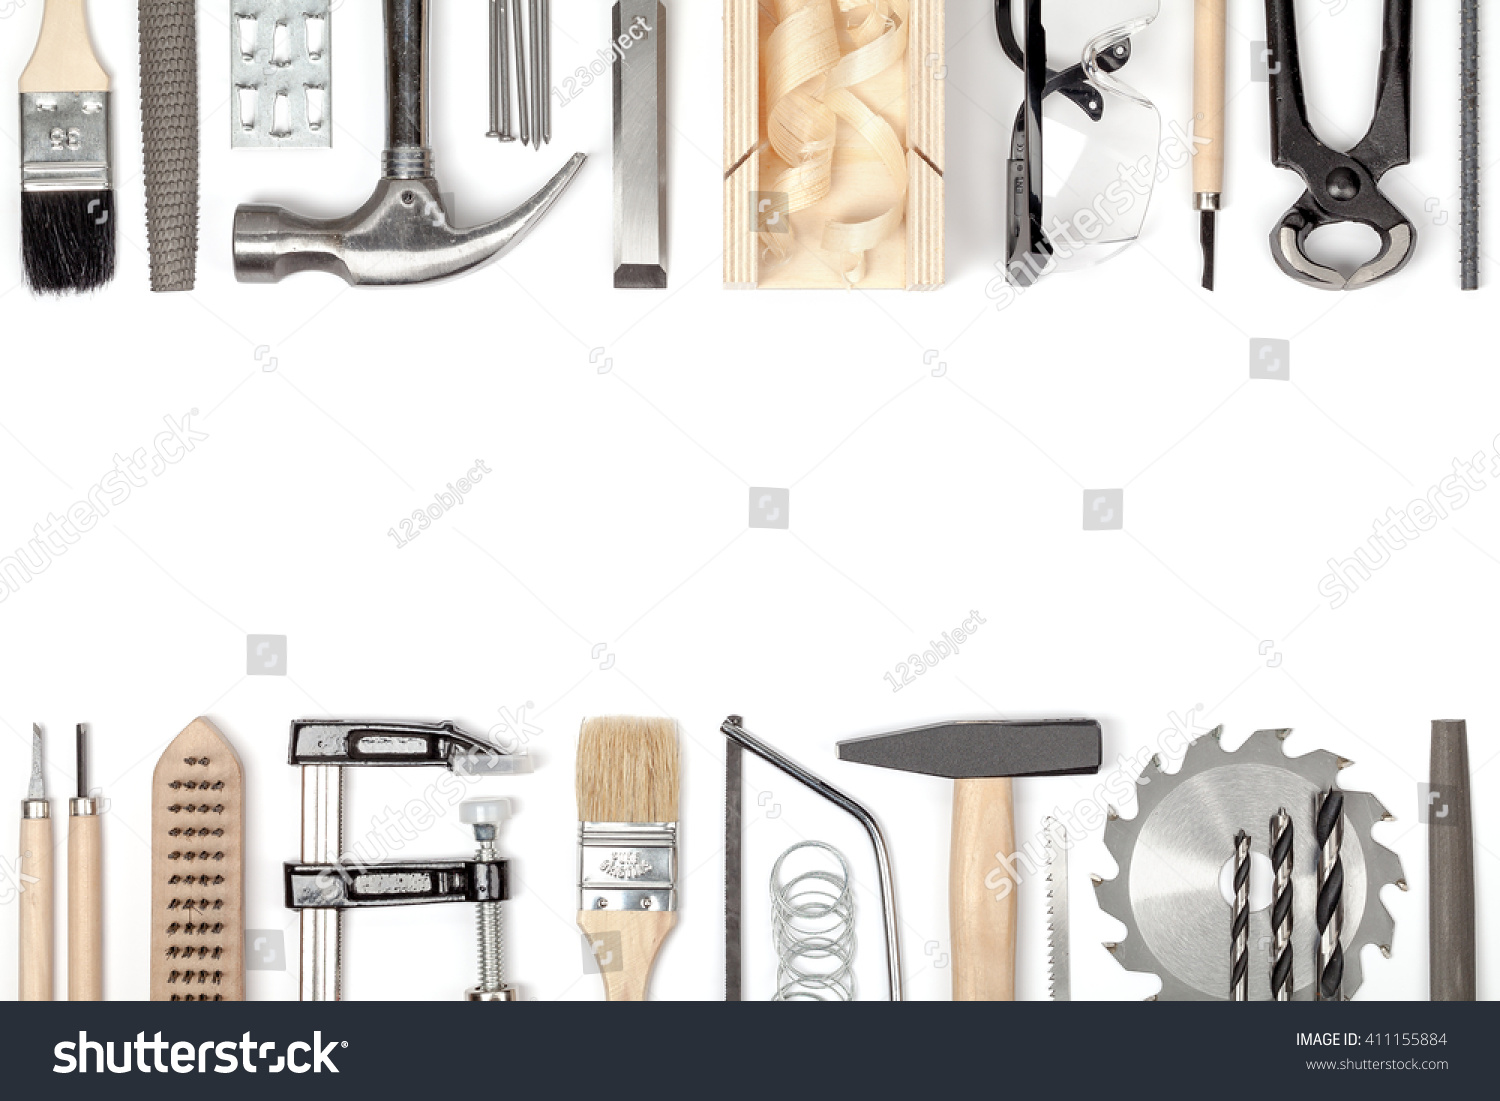 carpentry and woodwork tools on white background. carpenter working table. frame composition with copy space top view #411155884